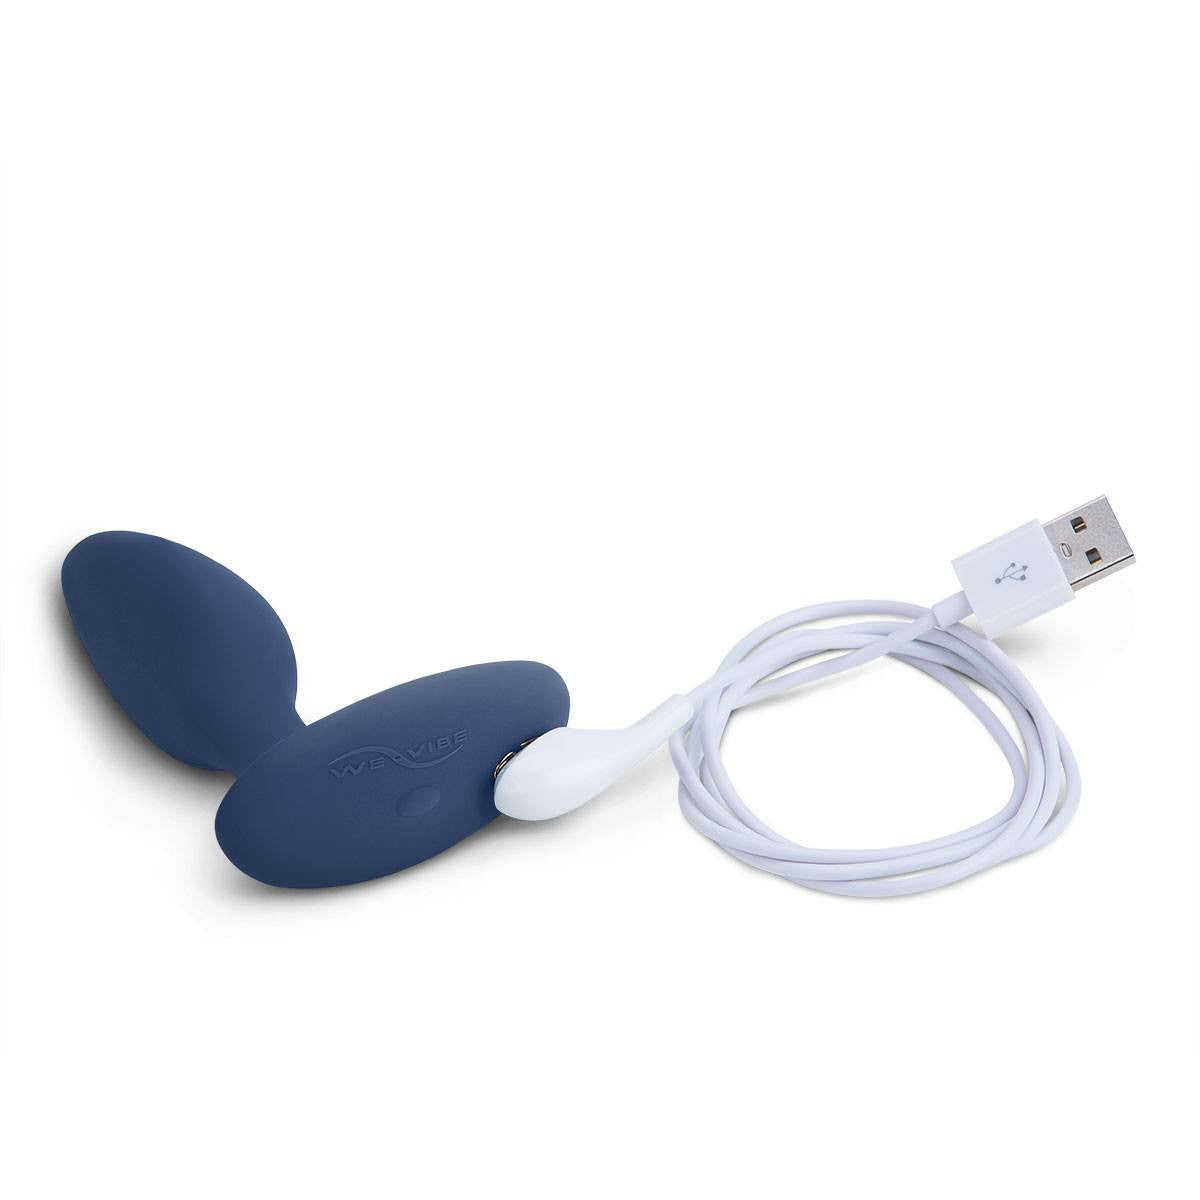 Ditto from We-Vibe Vibrating Rechargeable Silicone Anal Plug - Hamilton Park Electronics